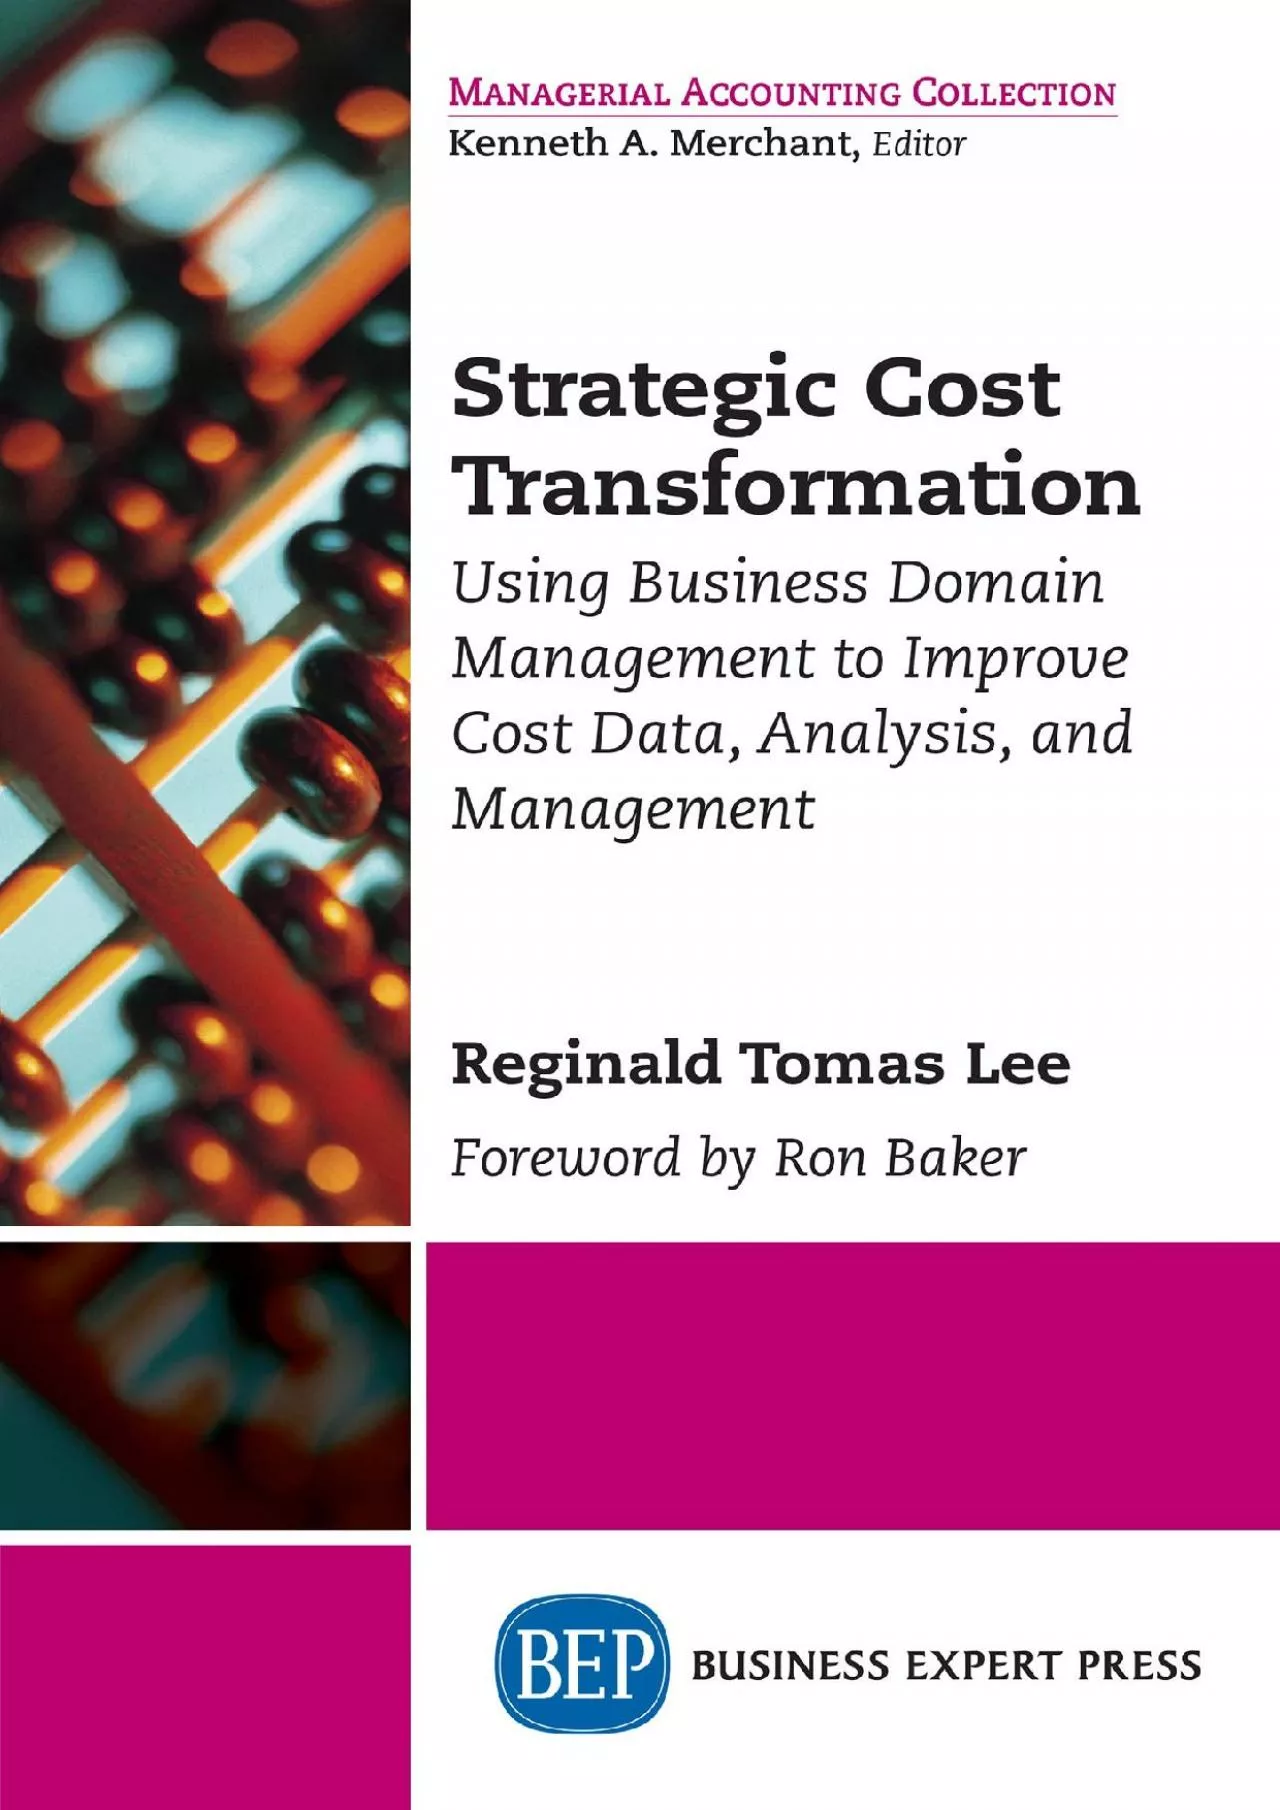 Strategic Cost Transformation: Using Business Domain Management to Improve Cost Data Analysis